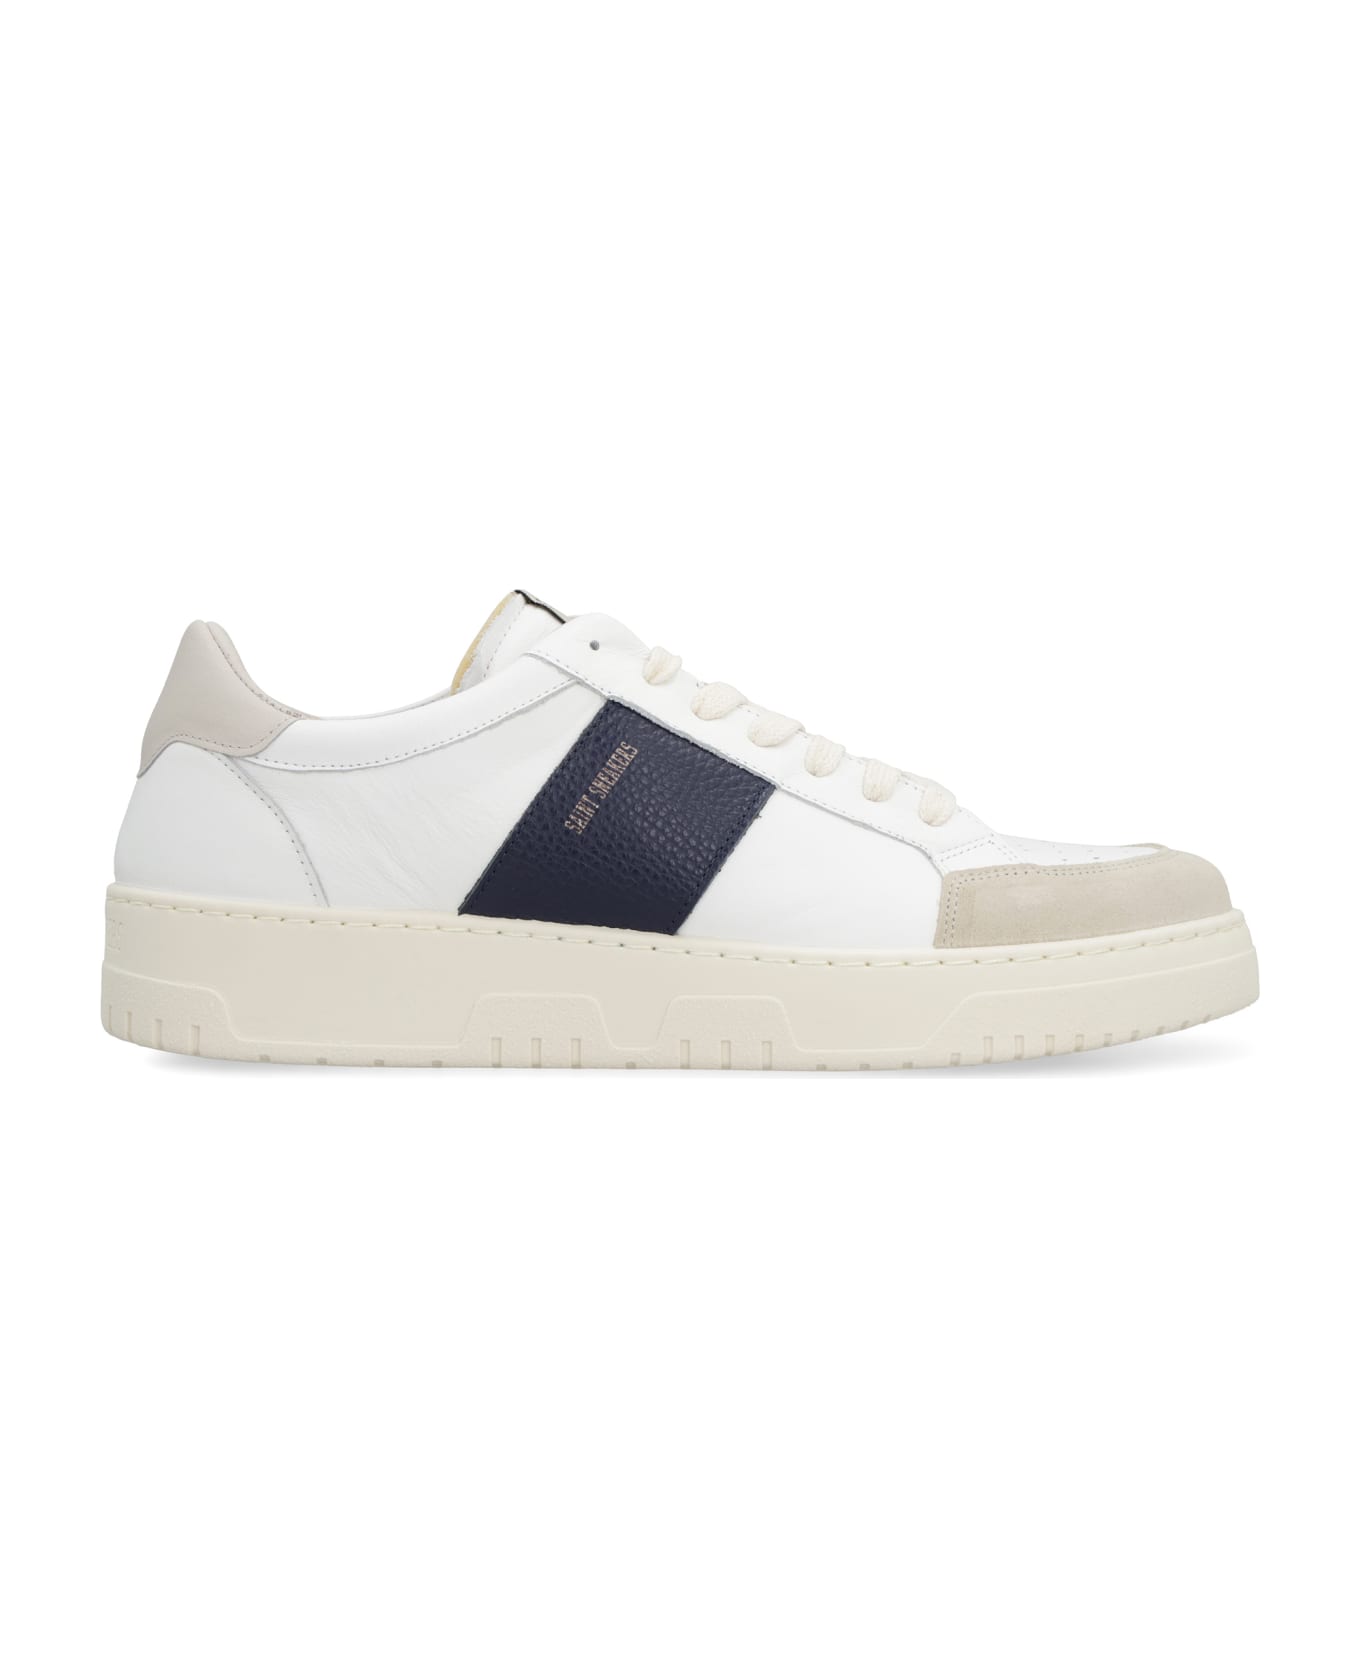 Saint Sneakers Sail Leather Low-top Sneakers - White